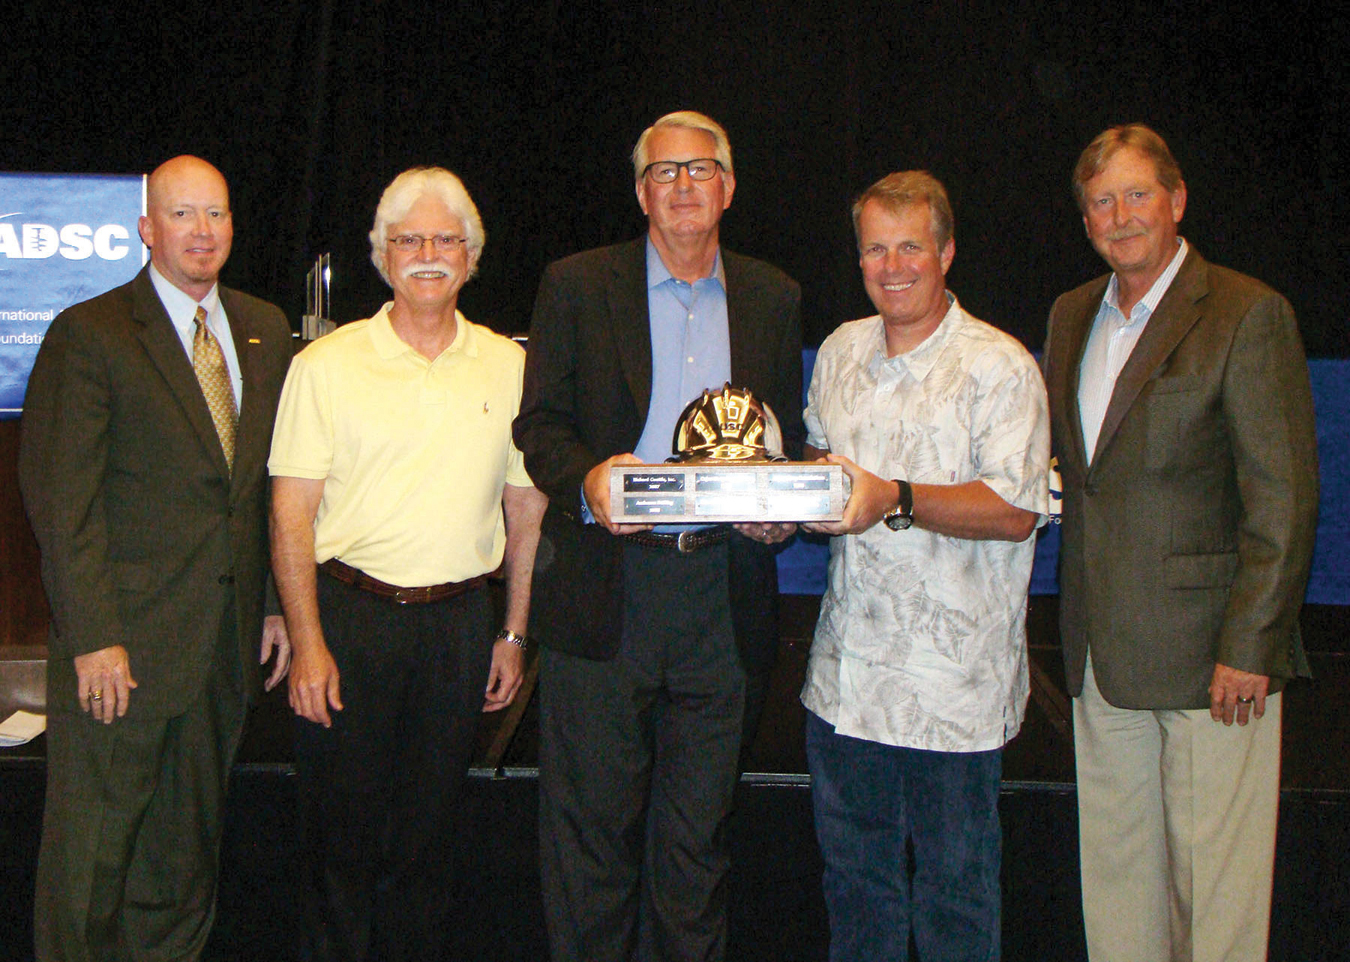 Rick Walsh and Steve Scherer accept the Rick Marshall Commitment to Excellence in Safety Award for Hayward Baker during the annual ADSC Awards Luncheon in July 2014.